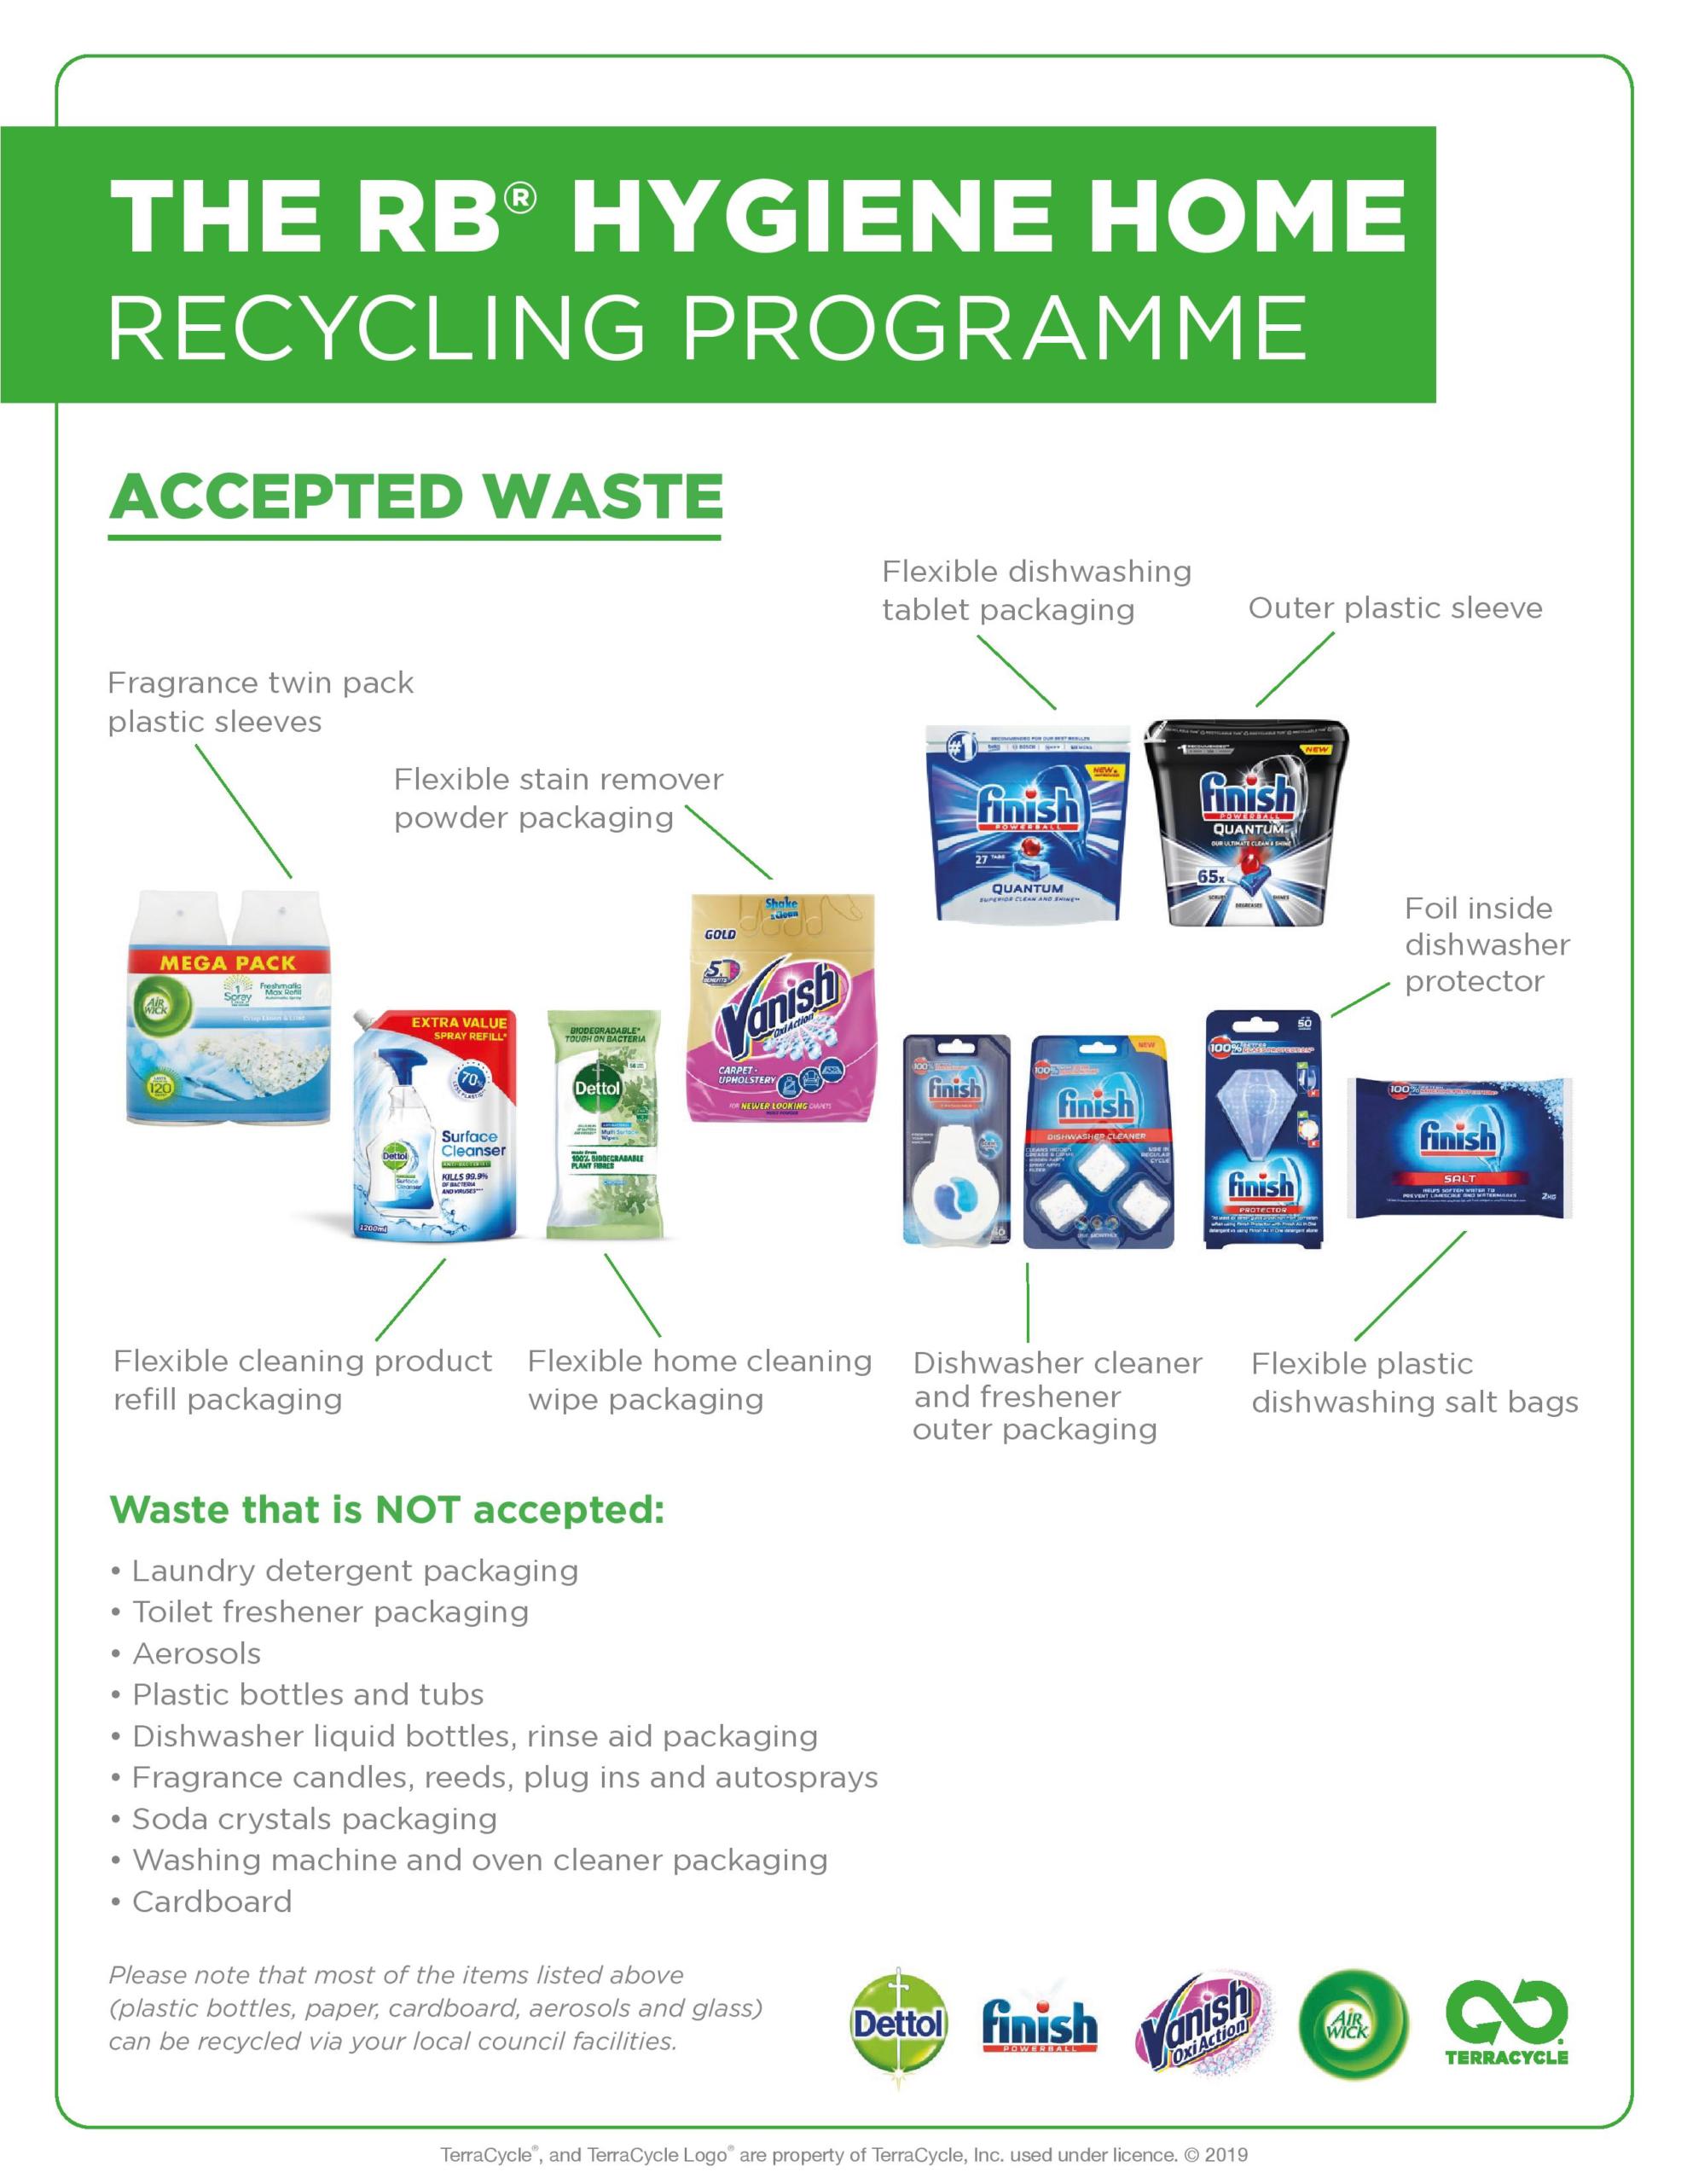 RB hygiene terracycle information poster